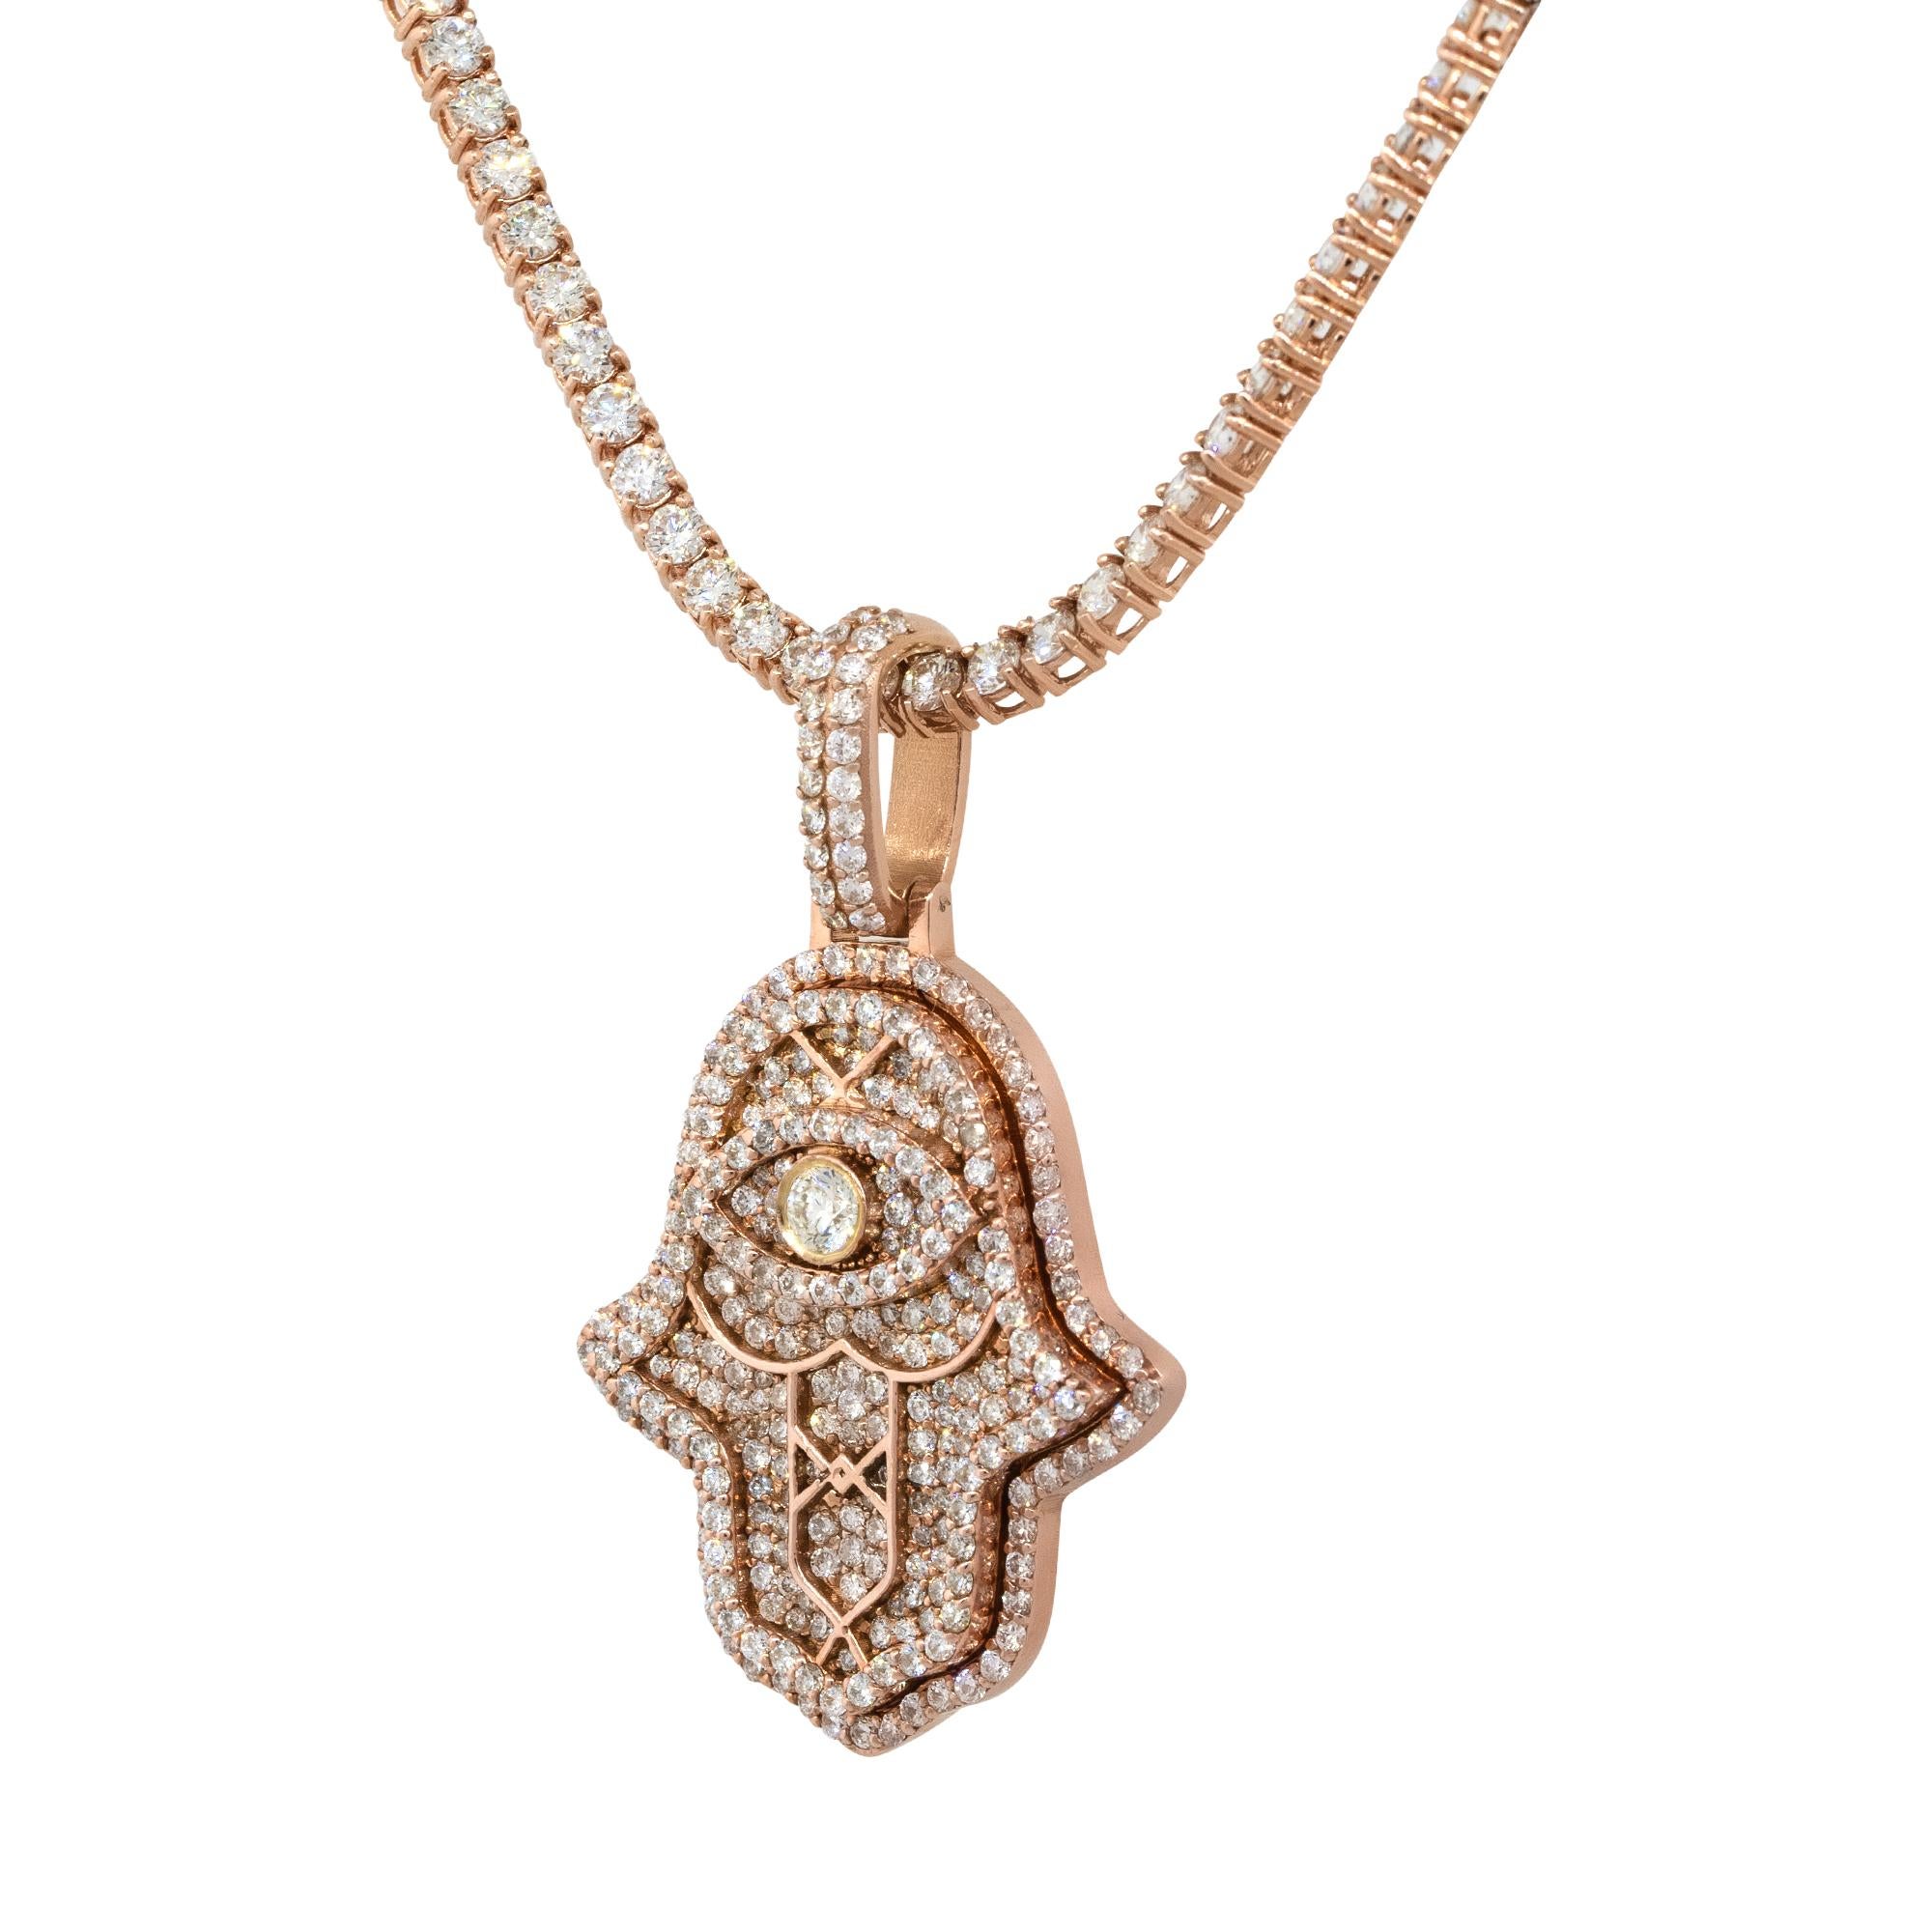 Material: 14k Rose Gold
Diamond Details: Approx. 2.67ctw of round cut Diamonds. Diamonds are G/H in color and SI/VS in clarity, 281 stones.  
Pendant Measurements: 28.15mm x 9.25mm x 46mm
Total Weight: 18.8g (12.1dwt) 
Additional details: Item comes